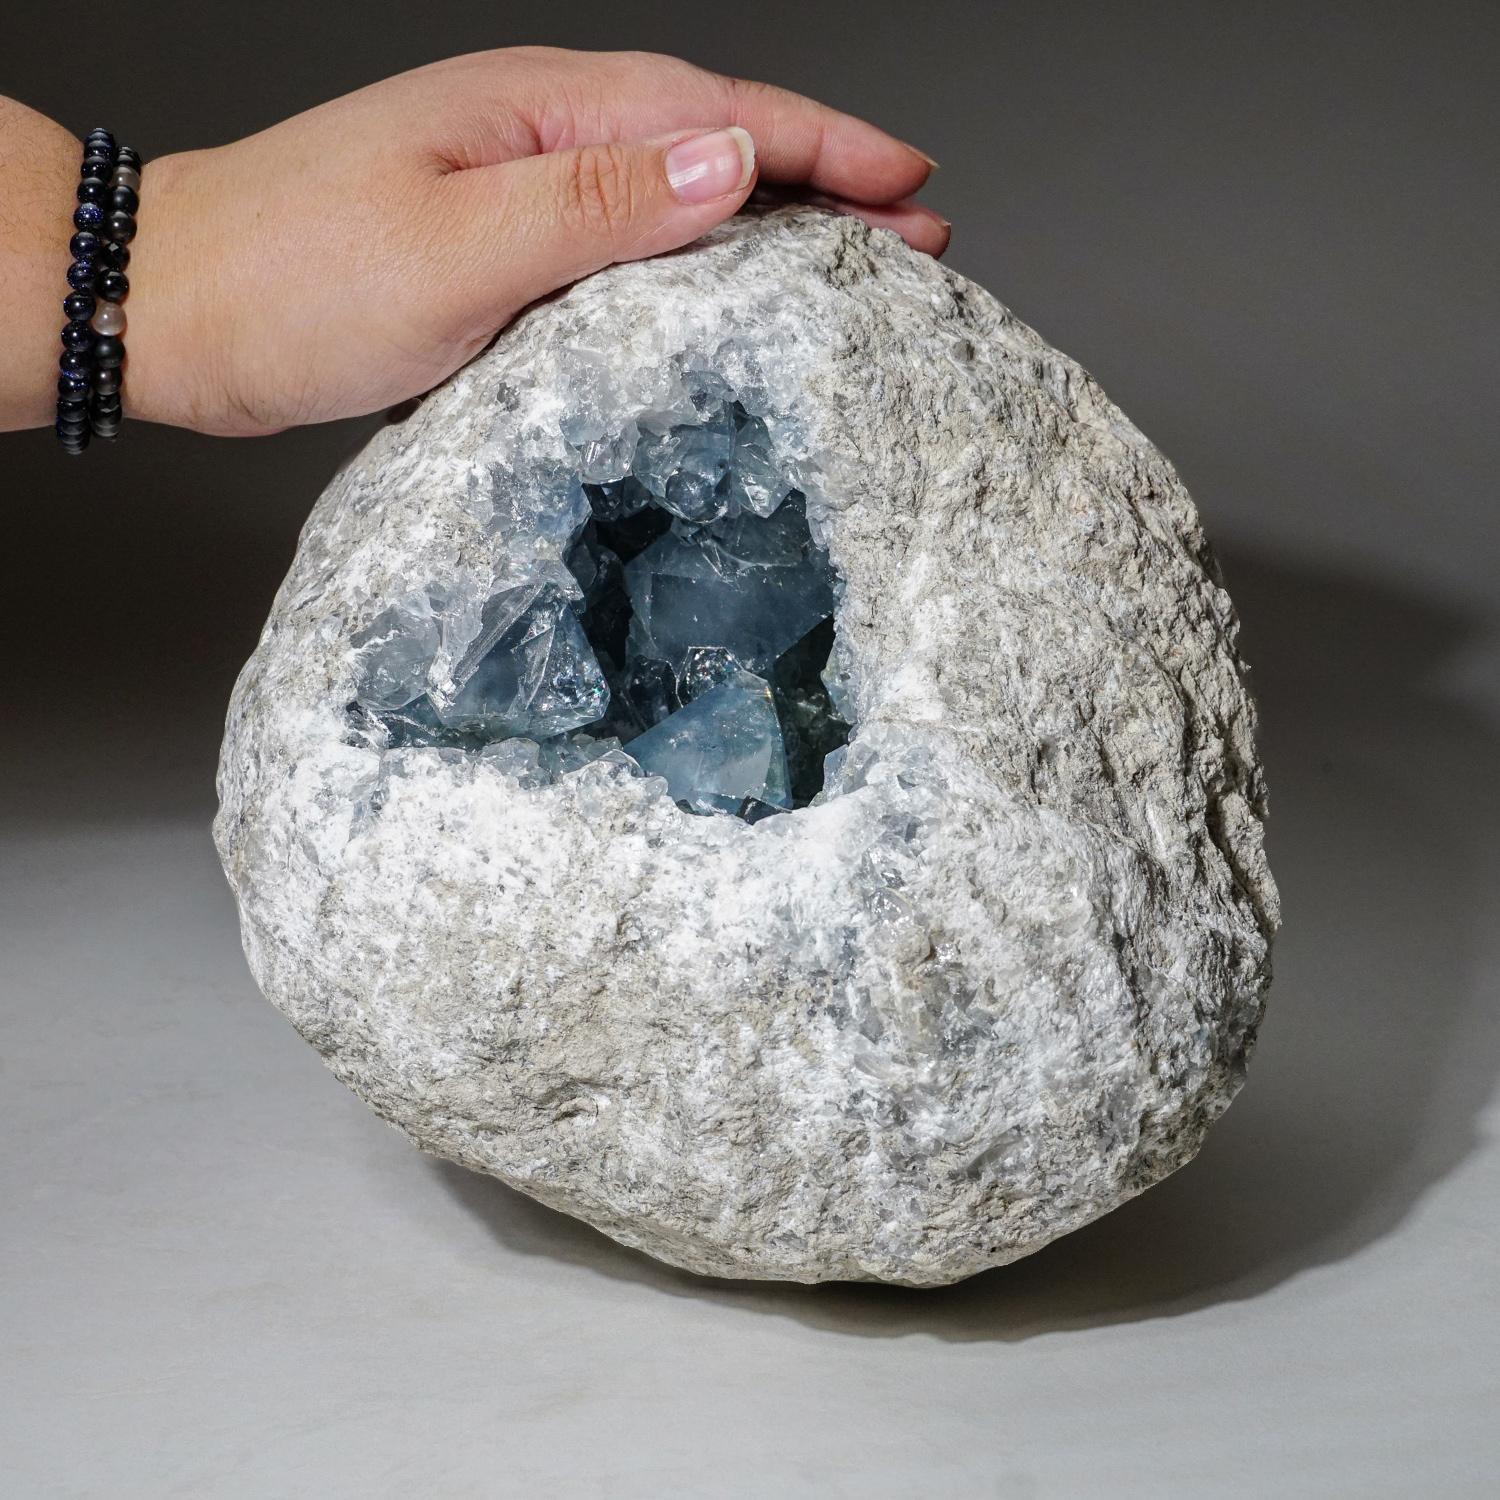 Lustrous large gem transparent crystals of blue Celestite. Has a few large crystals with prism faces and chisel-shaped terminations. This specimen has bright rich color, unlike the blueish grey color which is common from this region. All fully